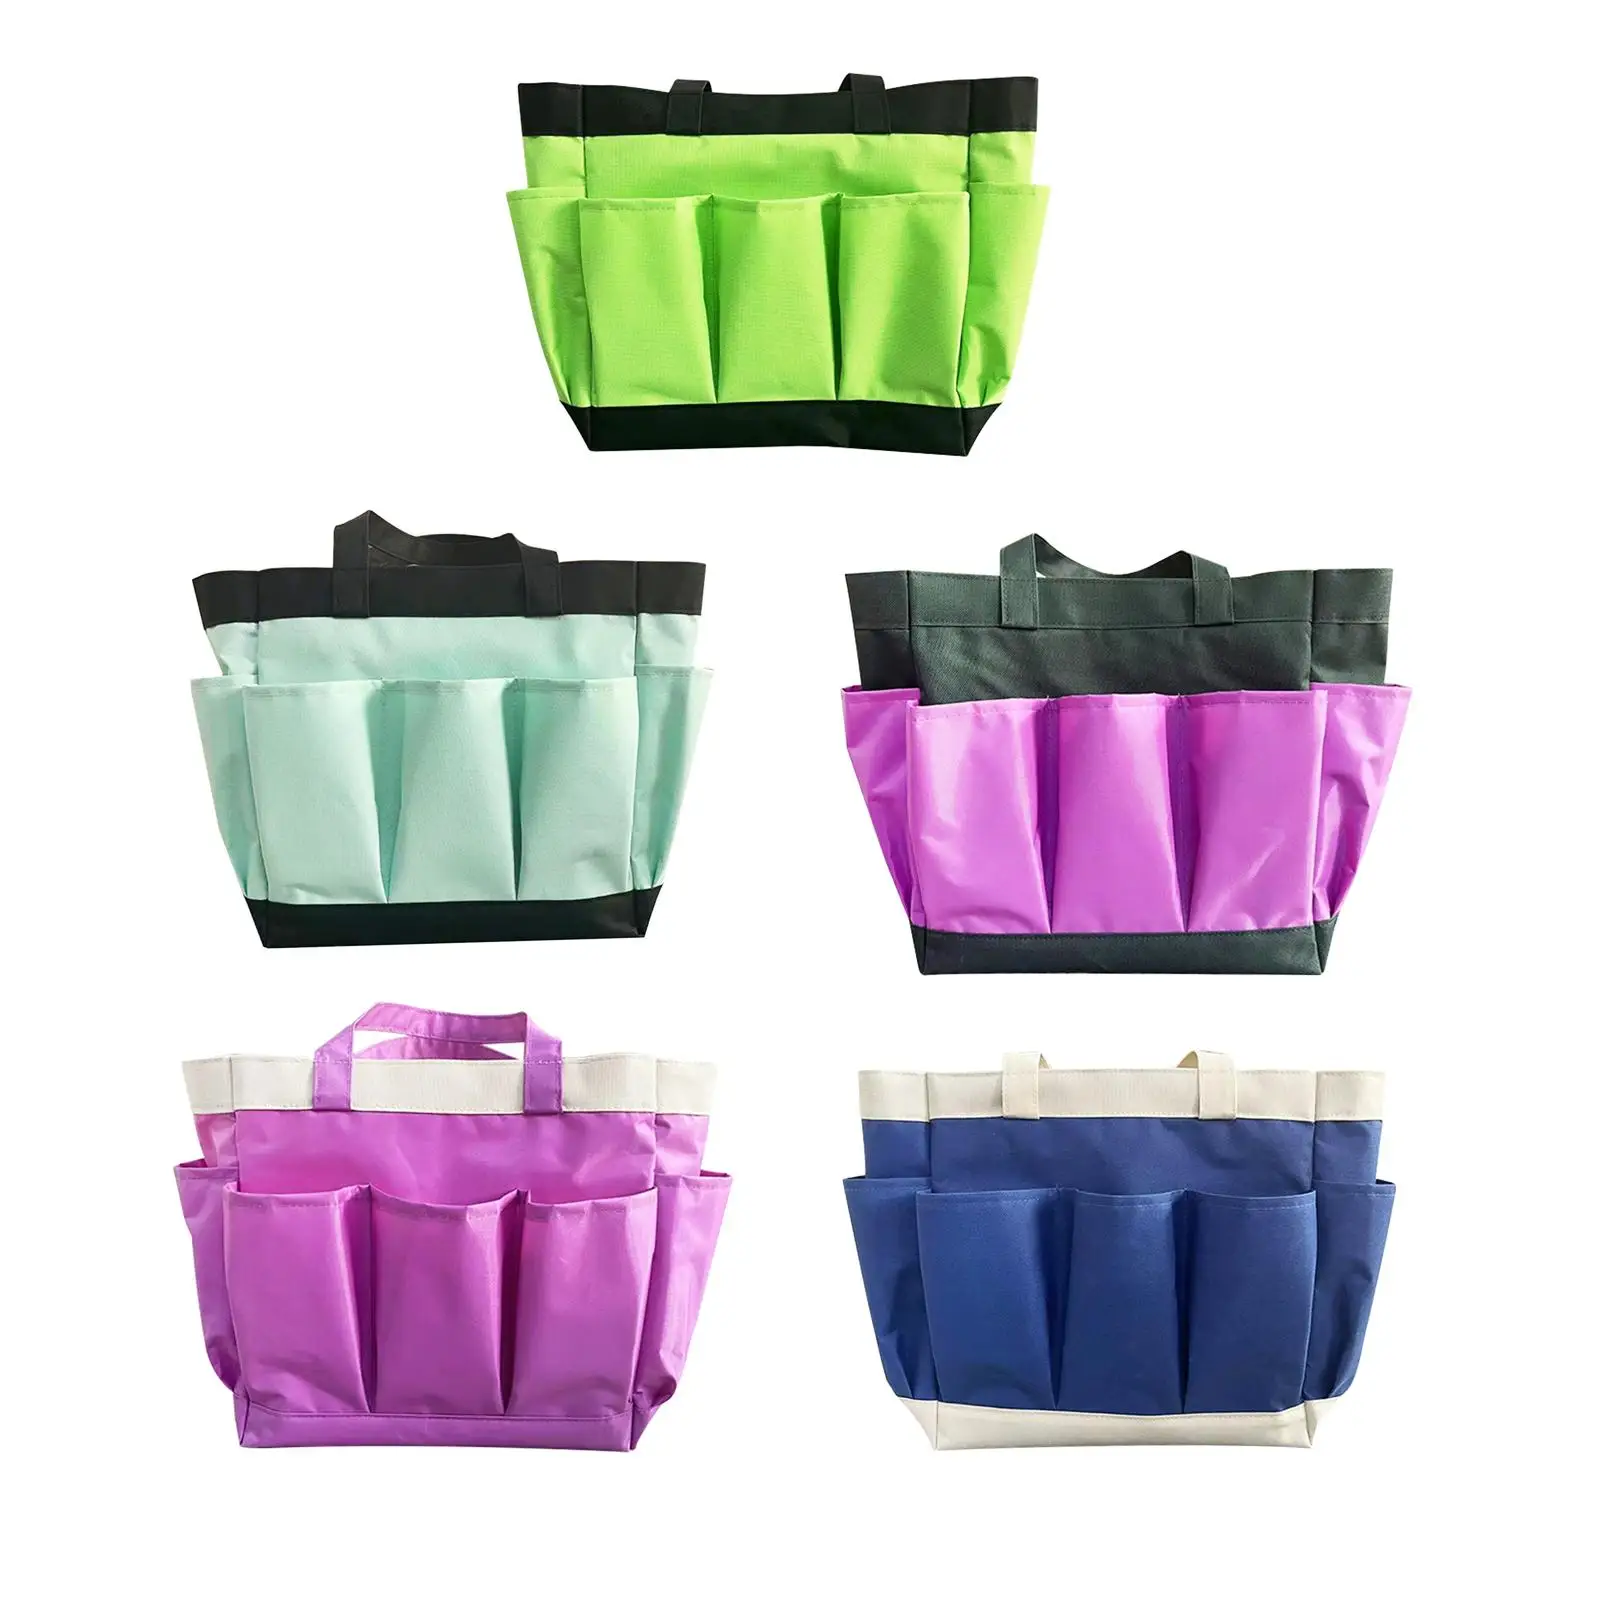 Garden Tool Bag Large Heavy Duty Home Organizer Portable Storage Gardening Hand Tools Bag for Lawn Garden Home Yard Lectrician